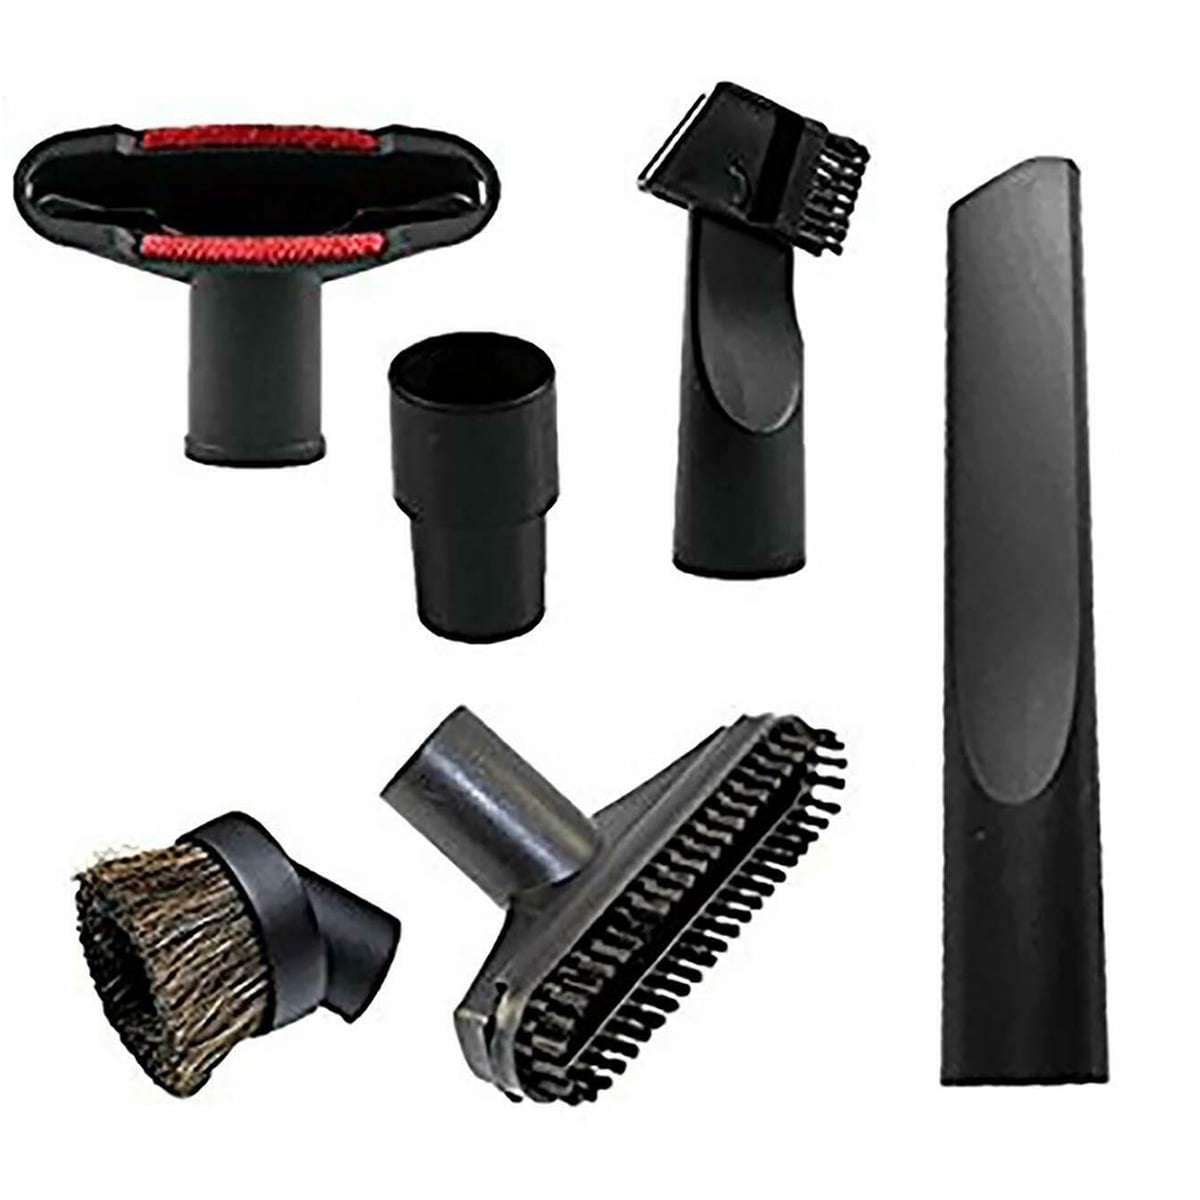 Details about   For Shark Vacuum Cleaner Brush Upholstery Crevice Tool Cleaning Kit 35mm Parts 